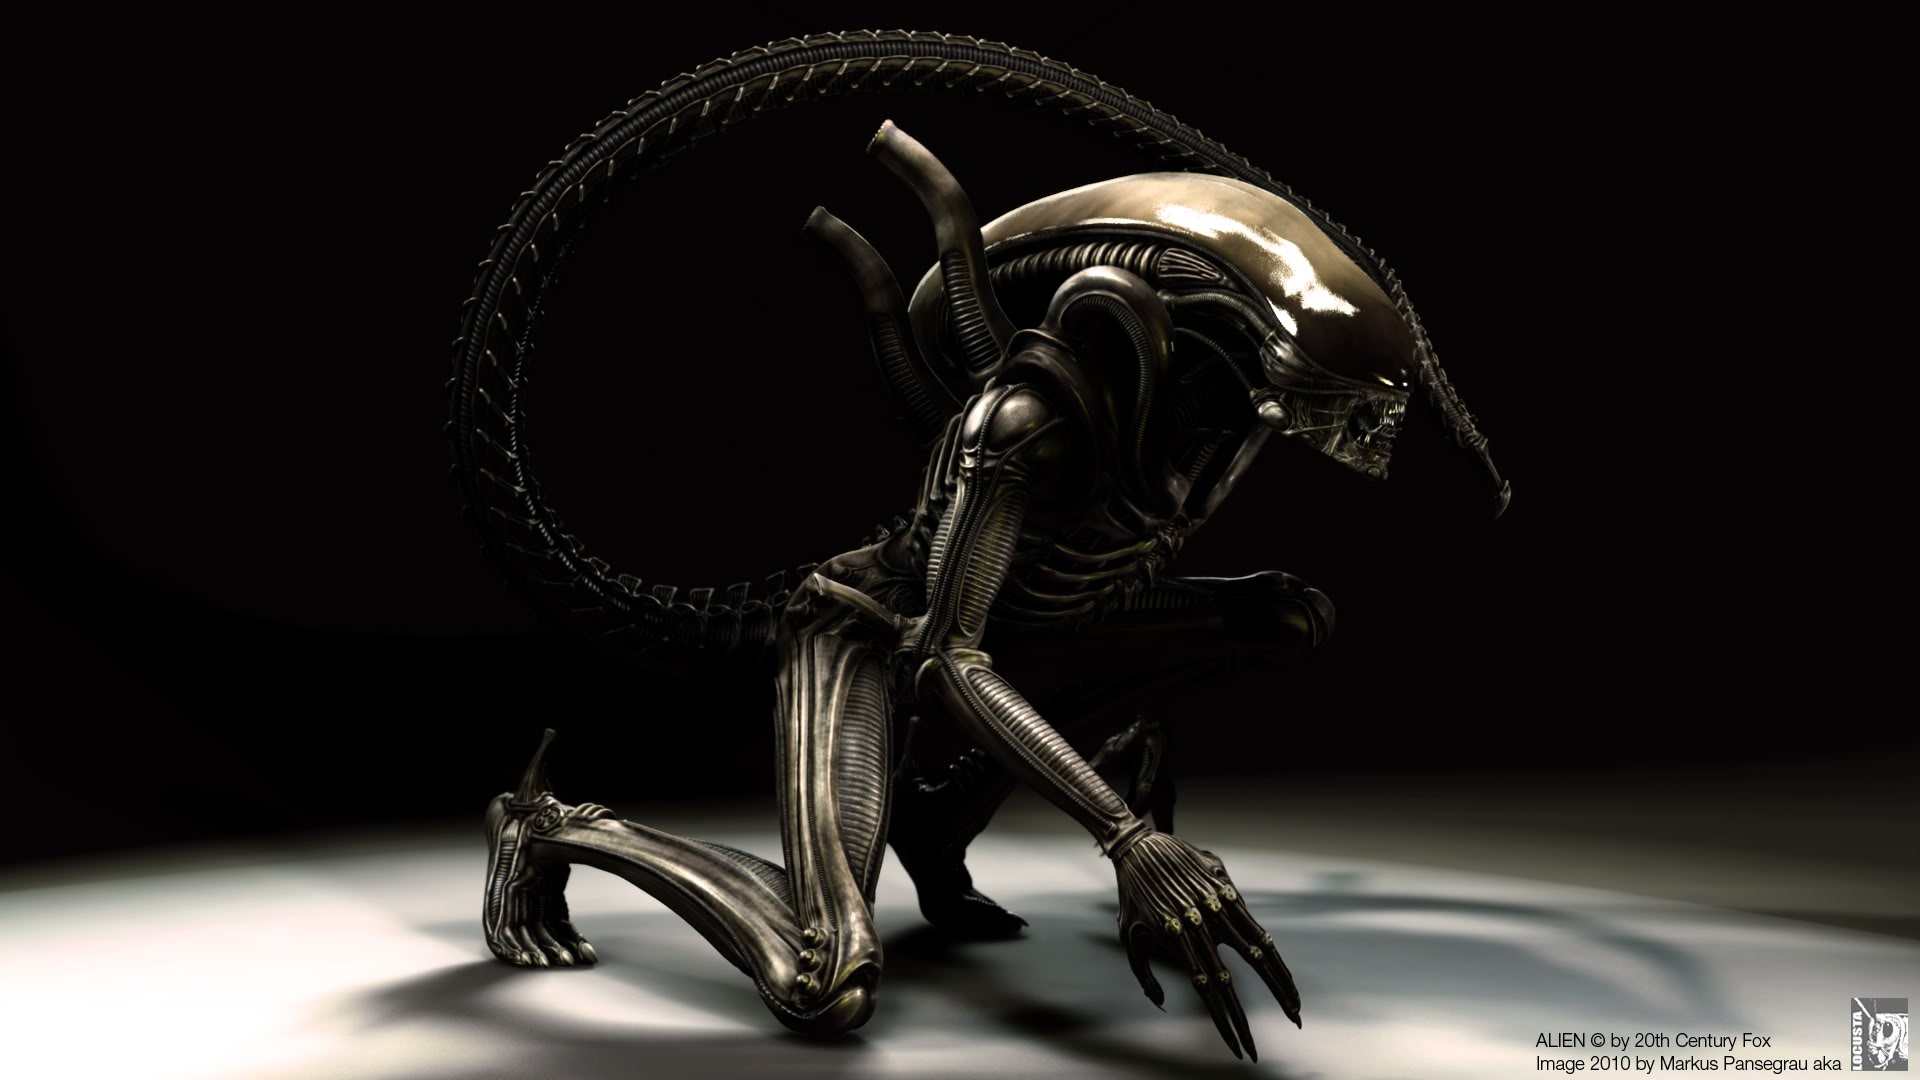 Alien Full HD, HDTV, 1080p 16:9 Wallpapers, HD Alien 1920x1080 Backgrounds,  Free Images Download